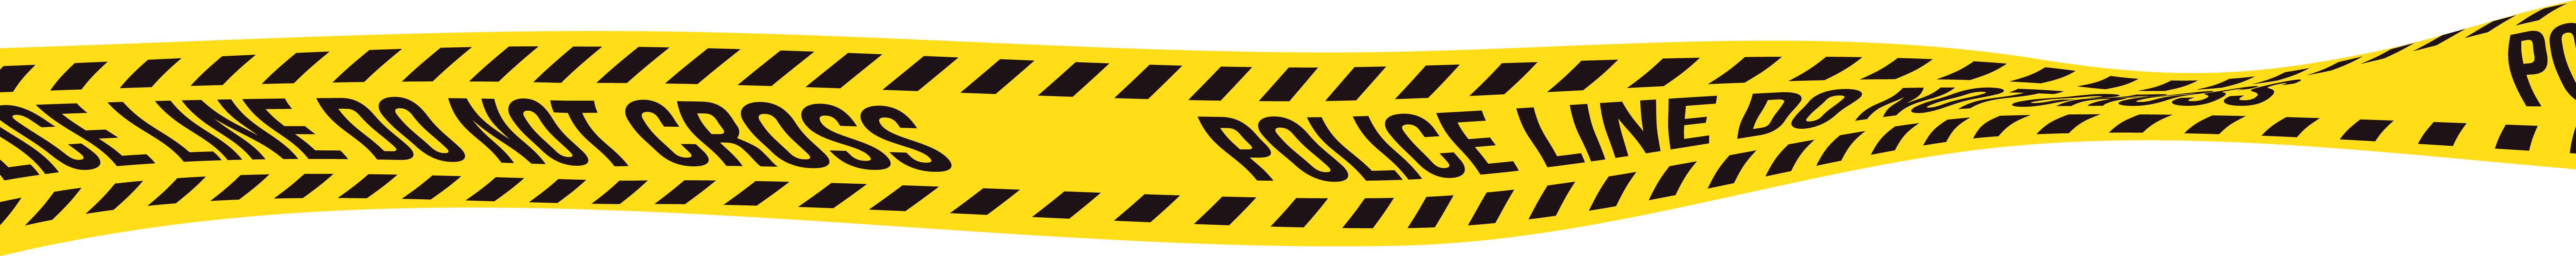 Caution Clipart Police Tape Picture 334526 Caution Clipart Police Tape